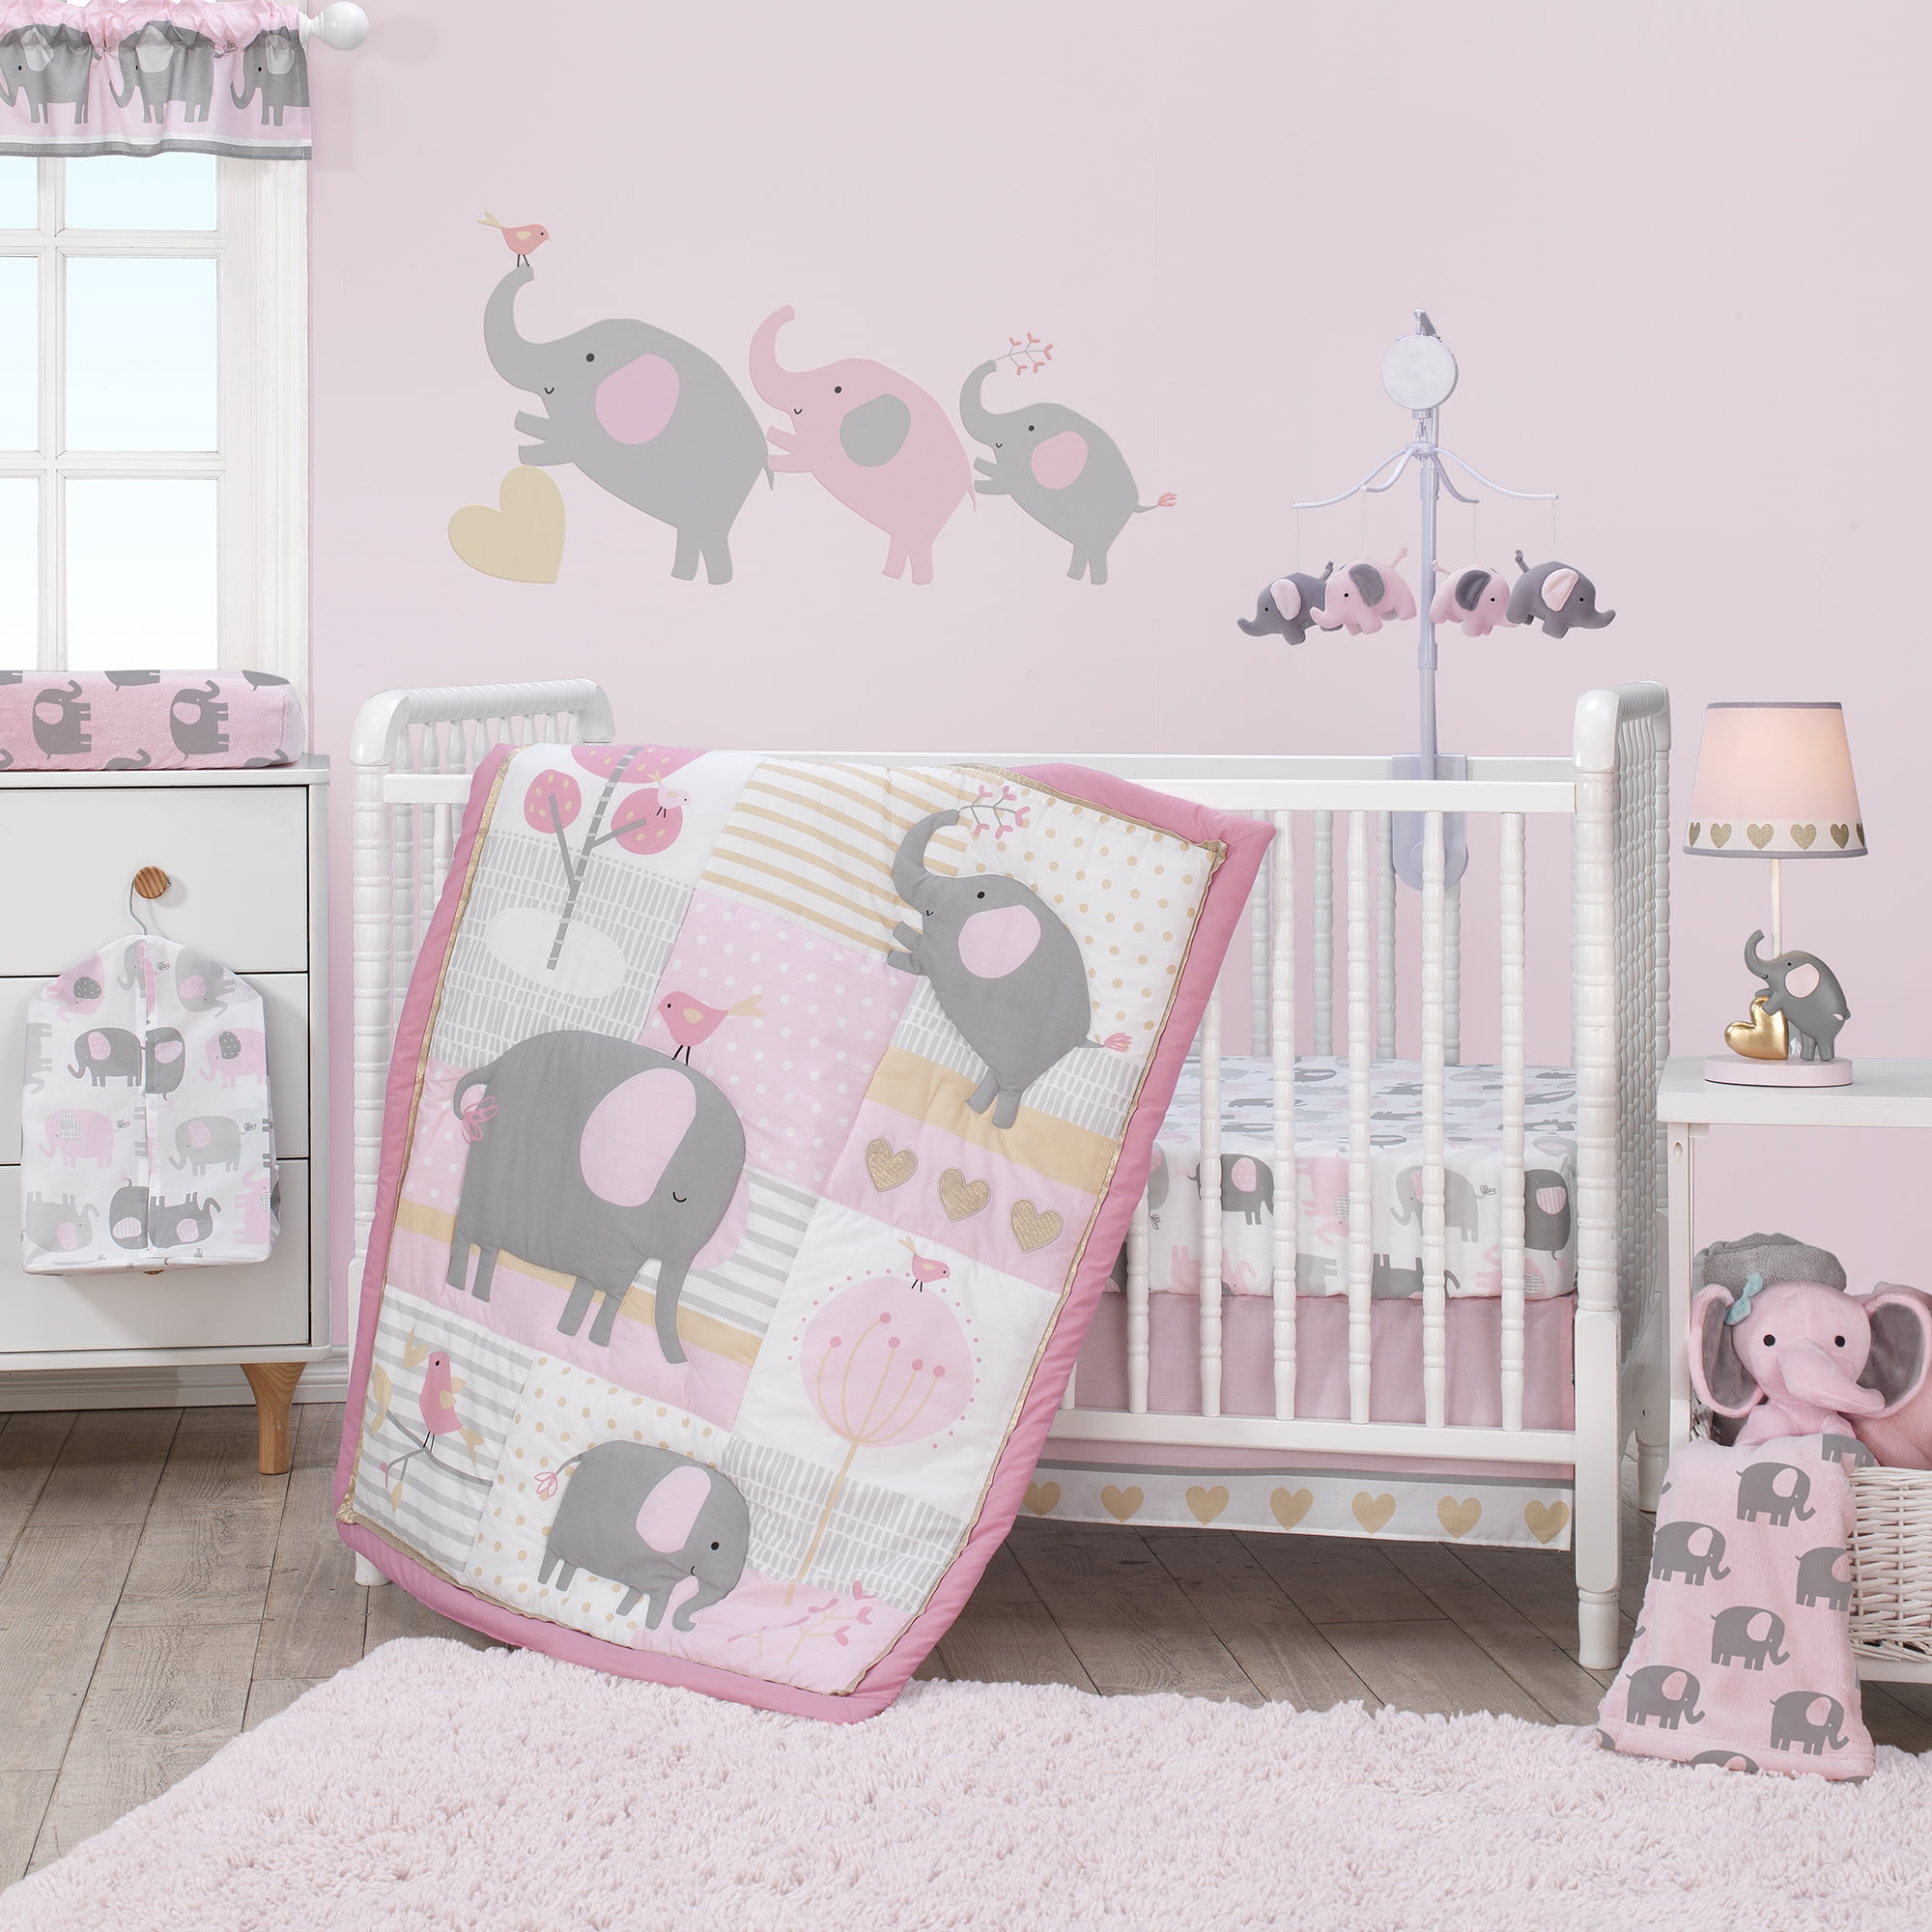 Disney Minnie Mouse Loves Dots 3 Piece Baby Crib Bedding Set See details 